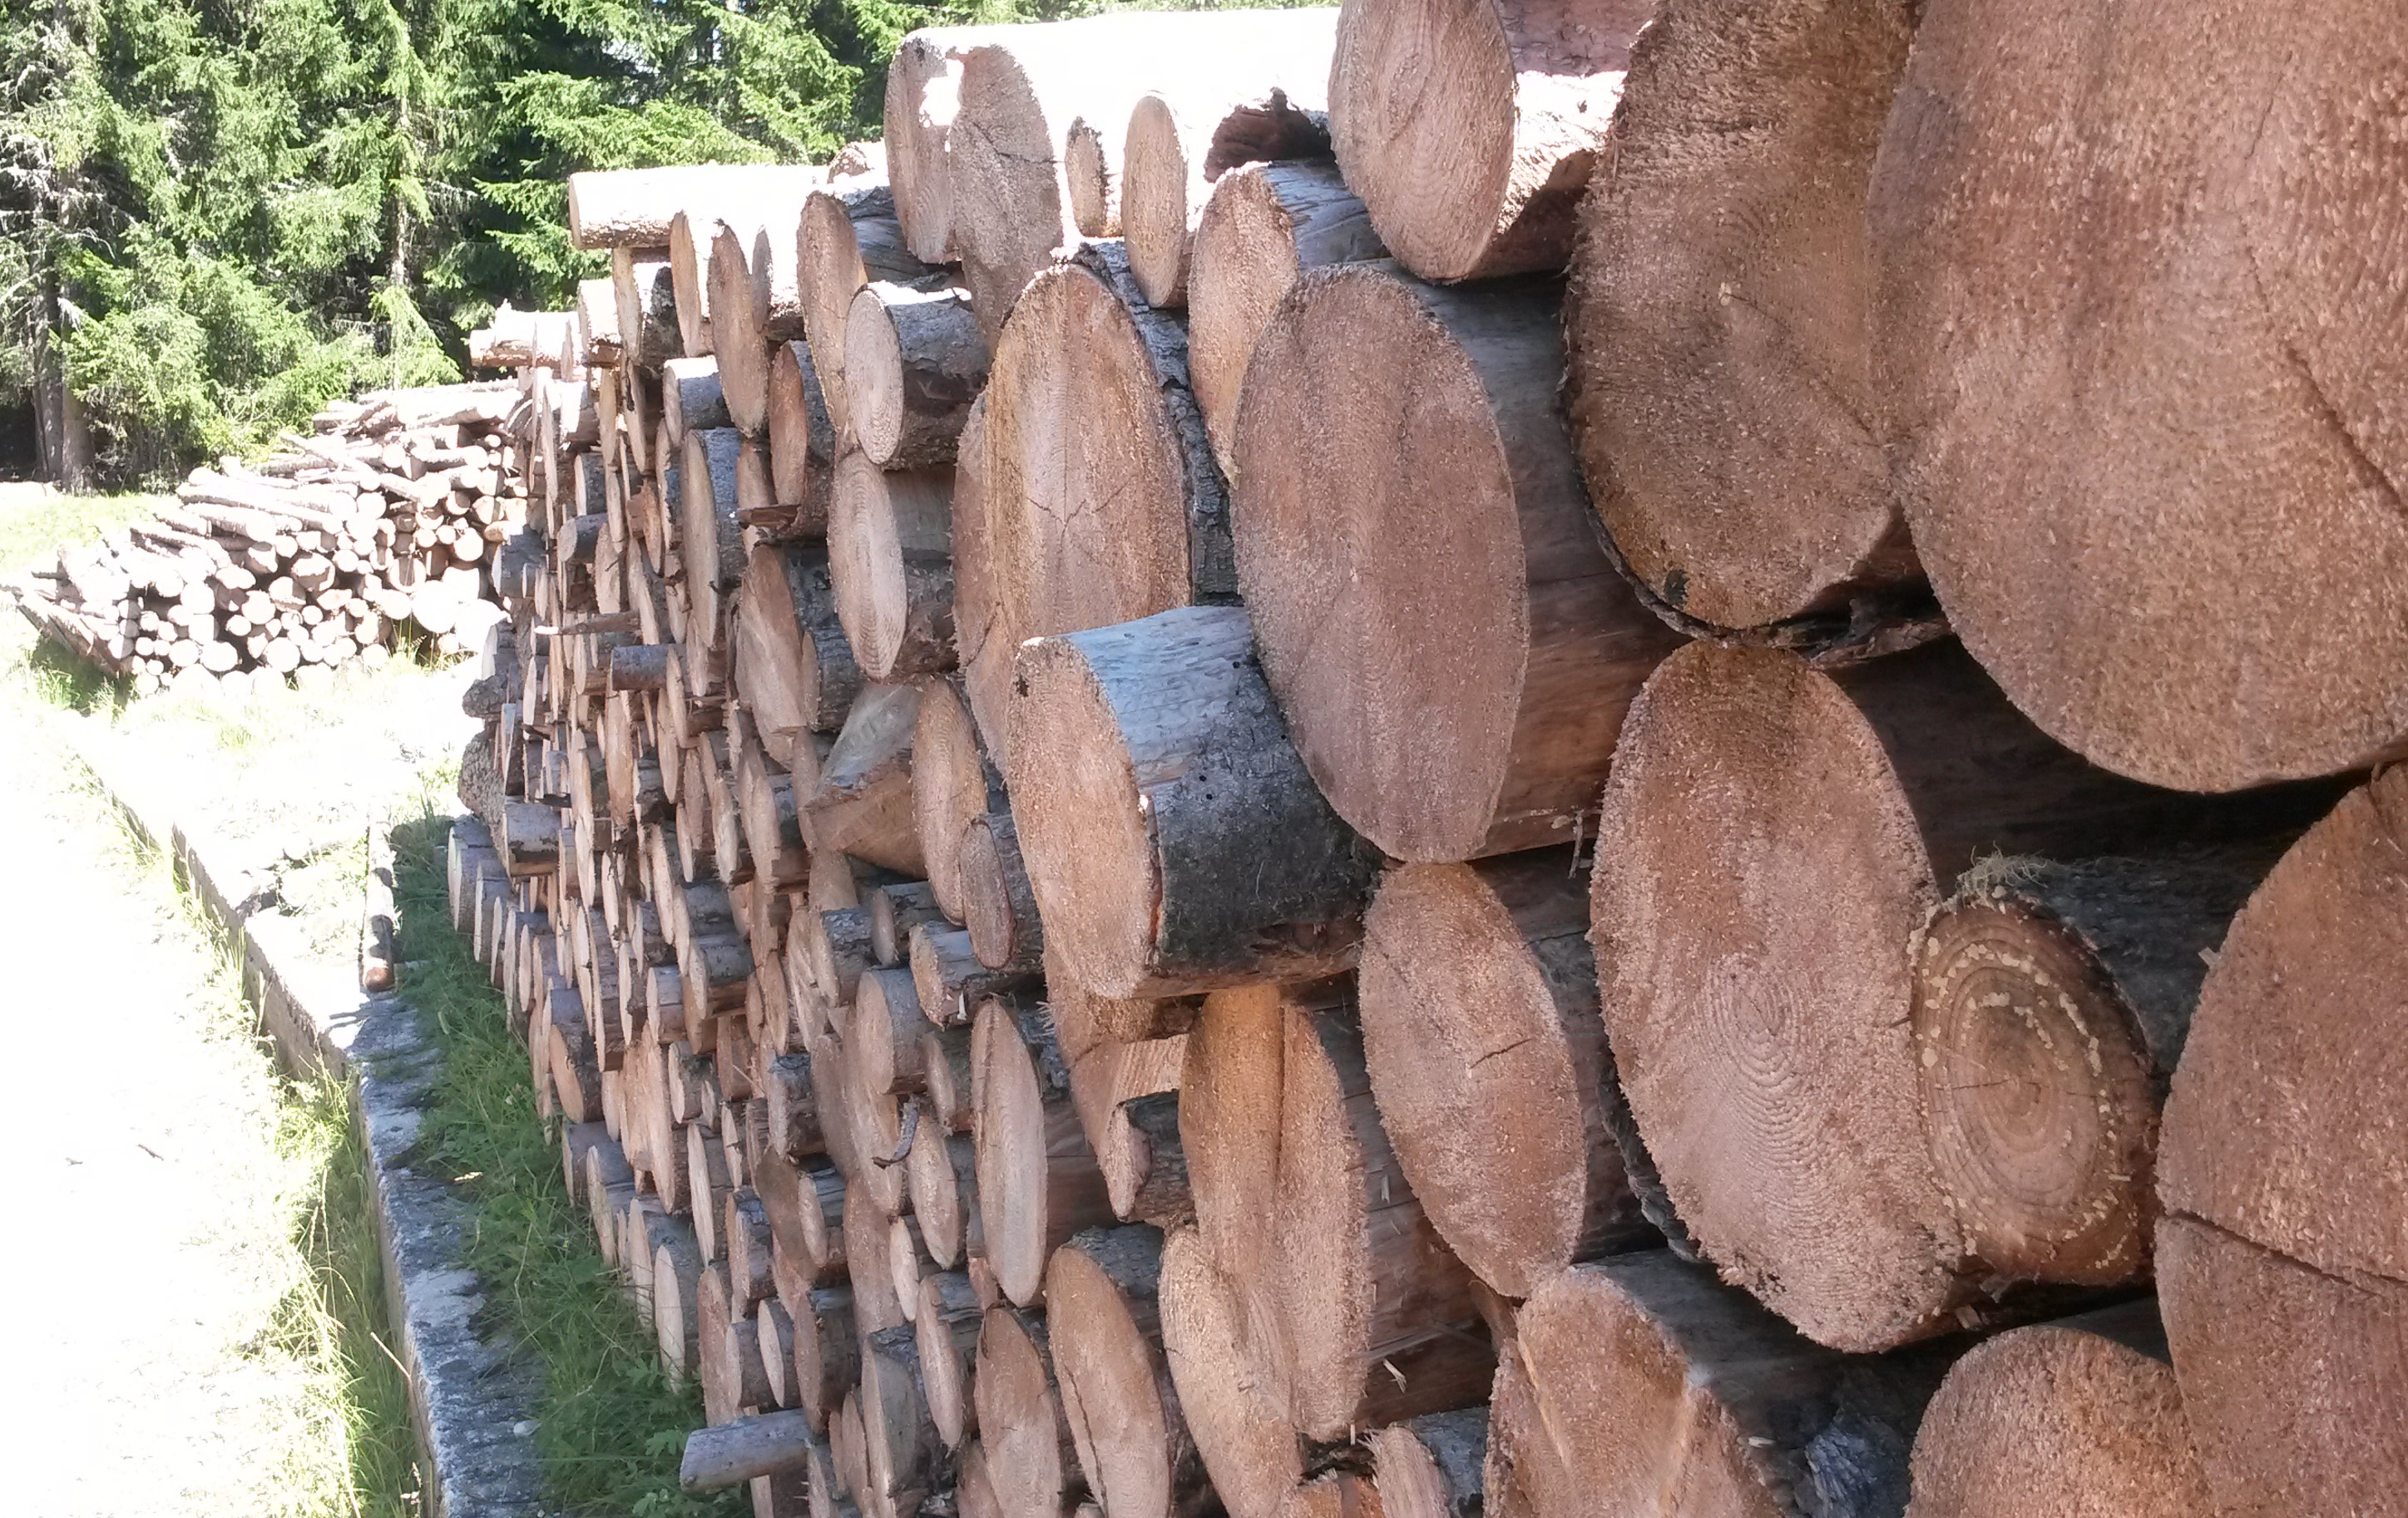 A pile of logs along a forest path.